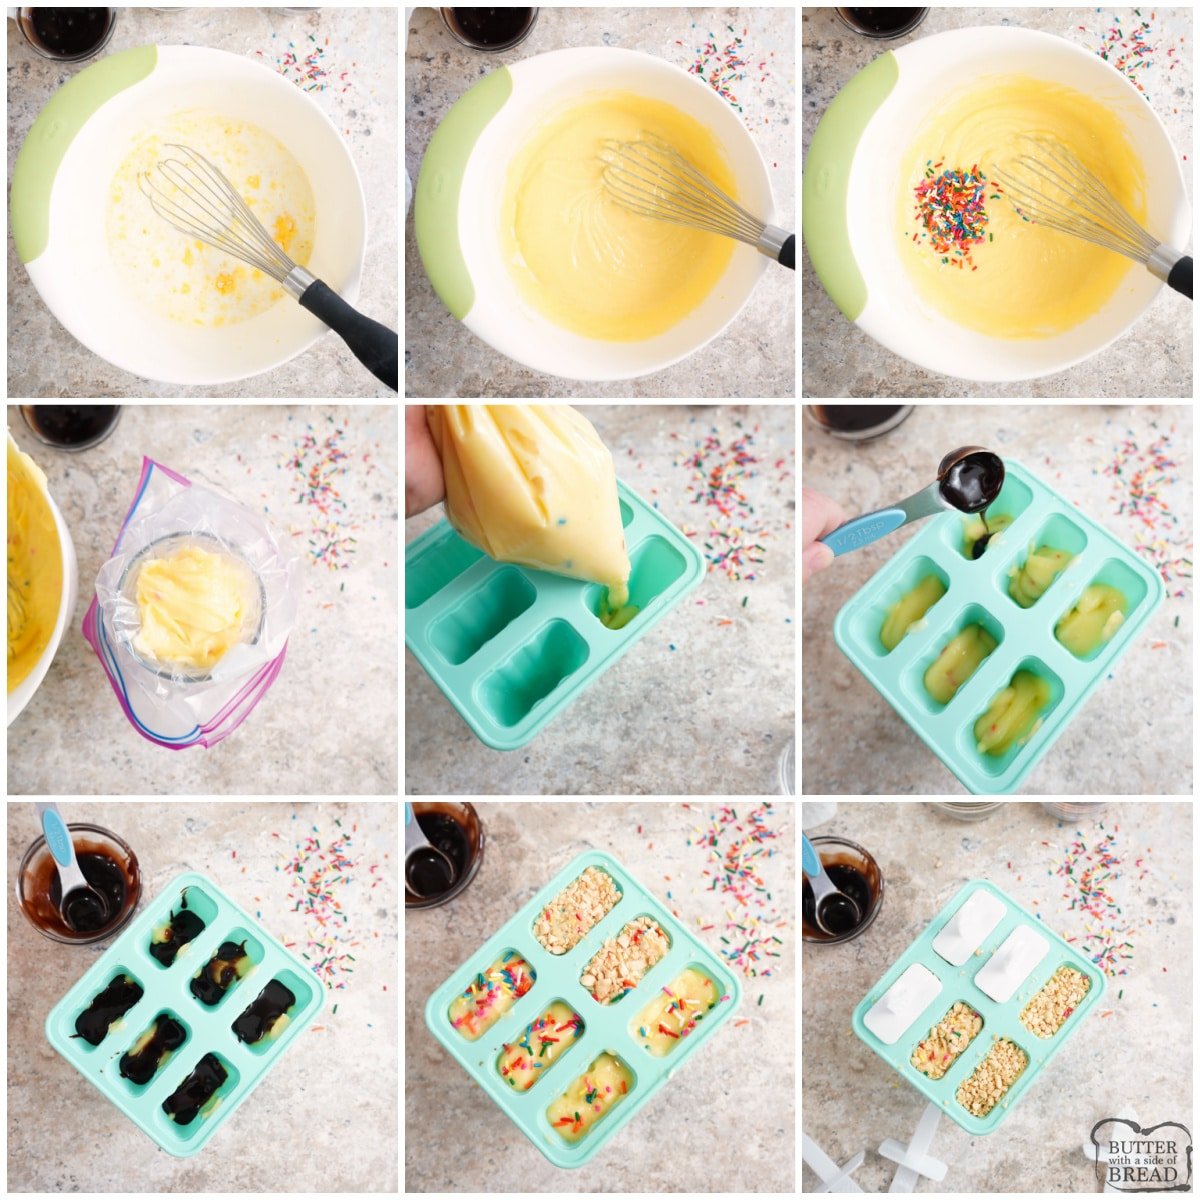 Step by step instructions on how to make Hot Fudge Sundae Pudding Pops